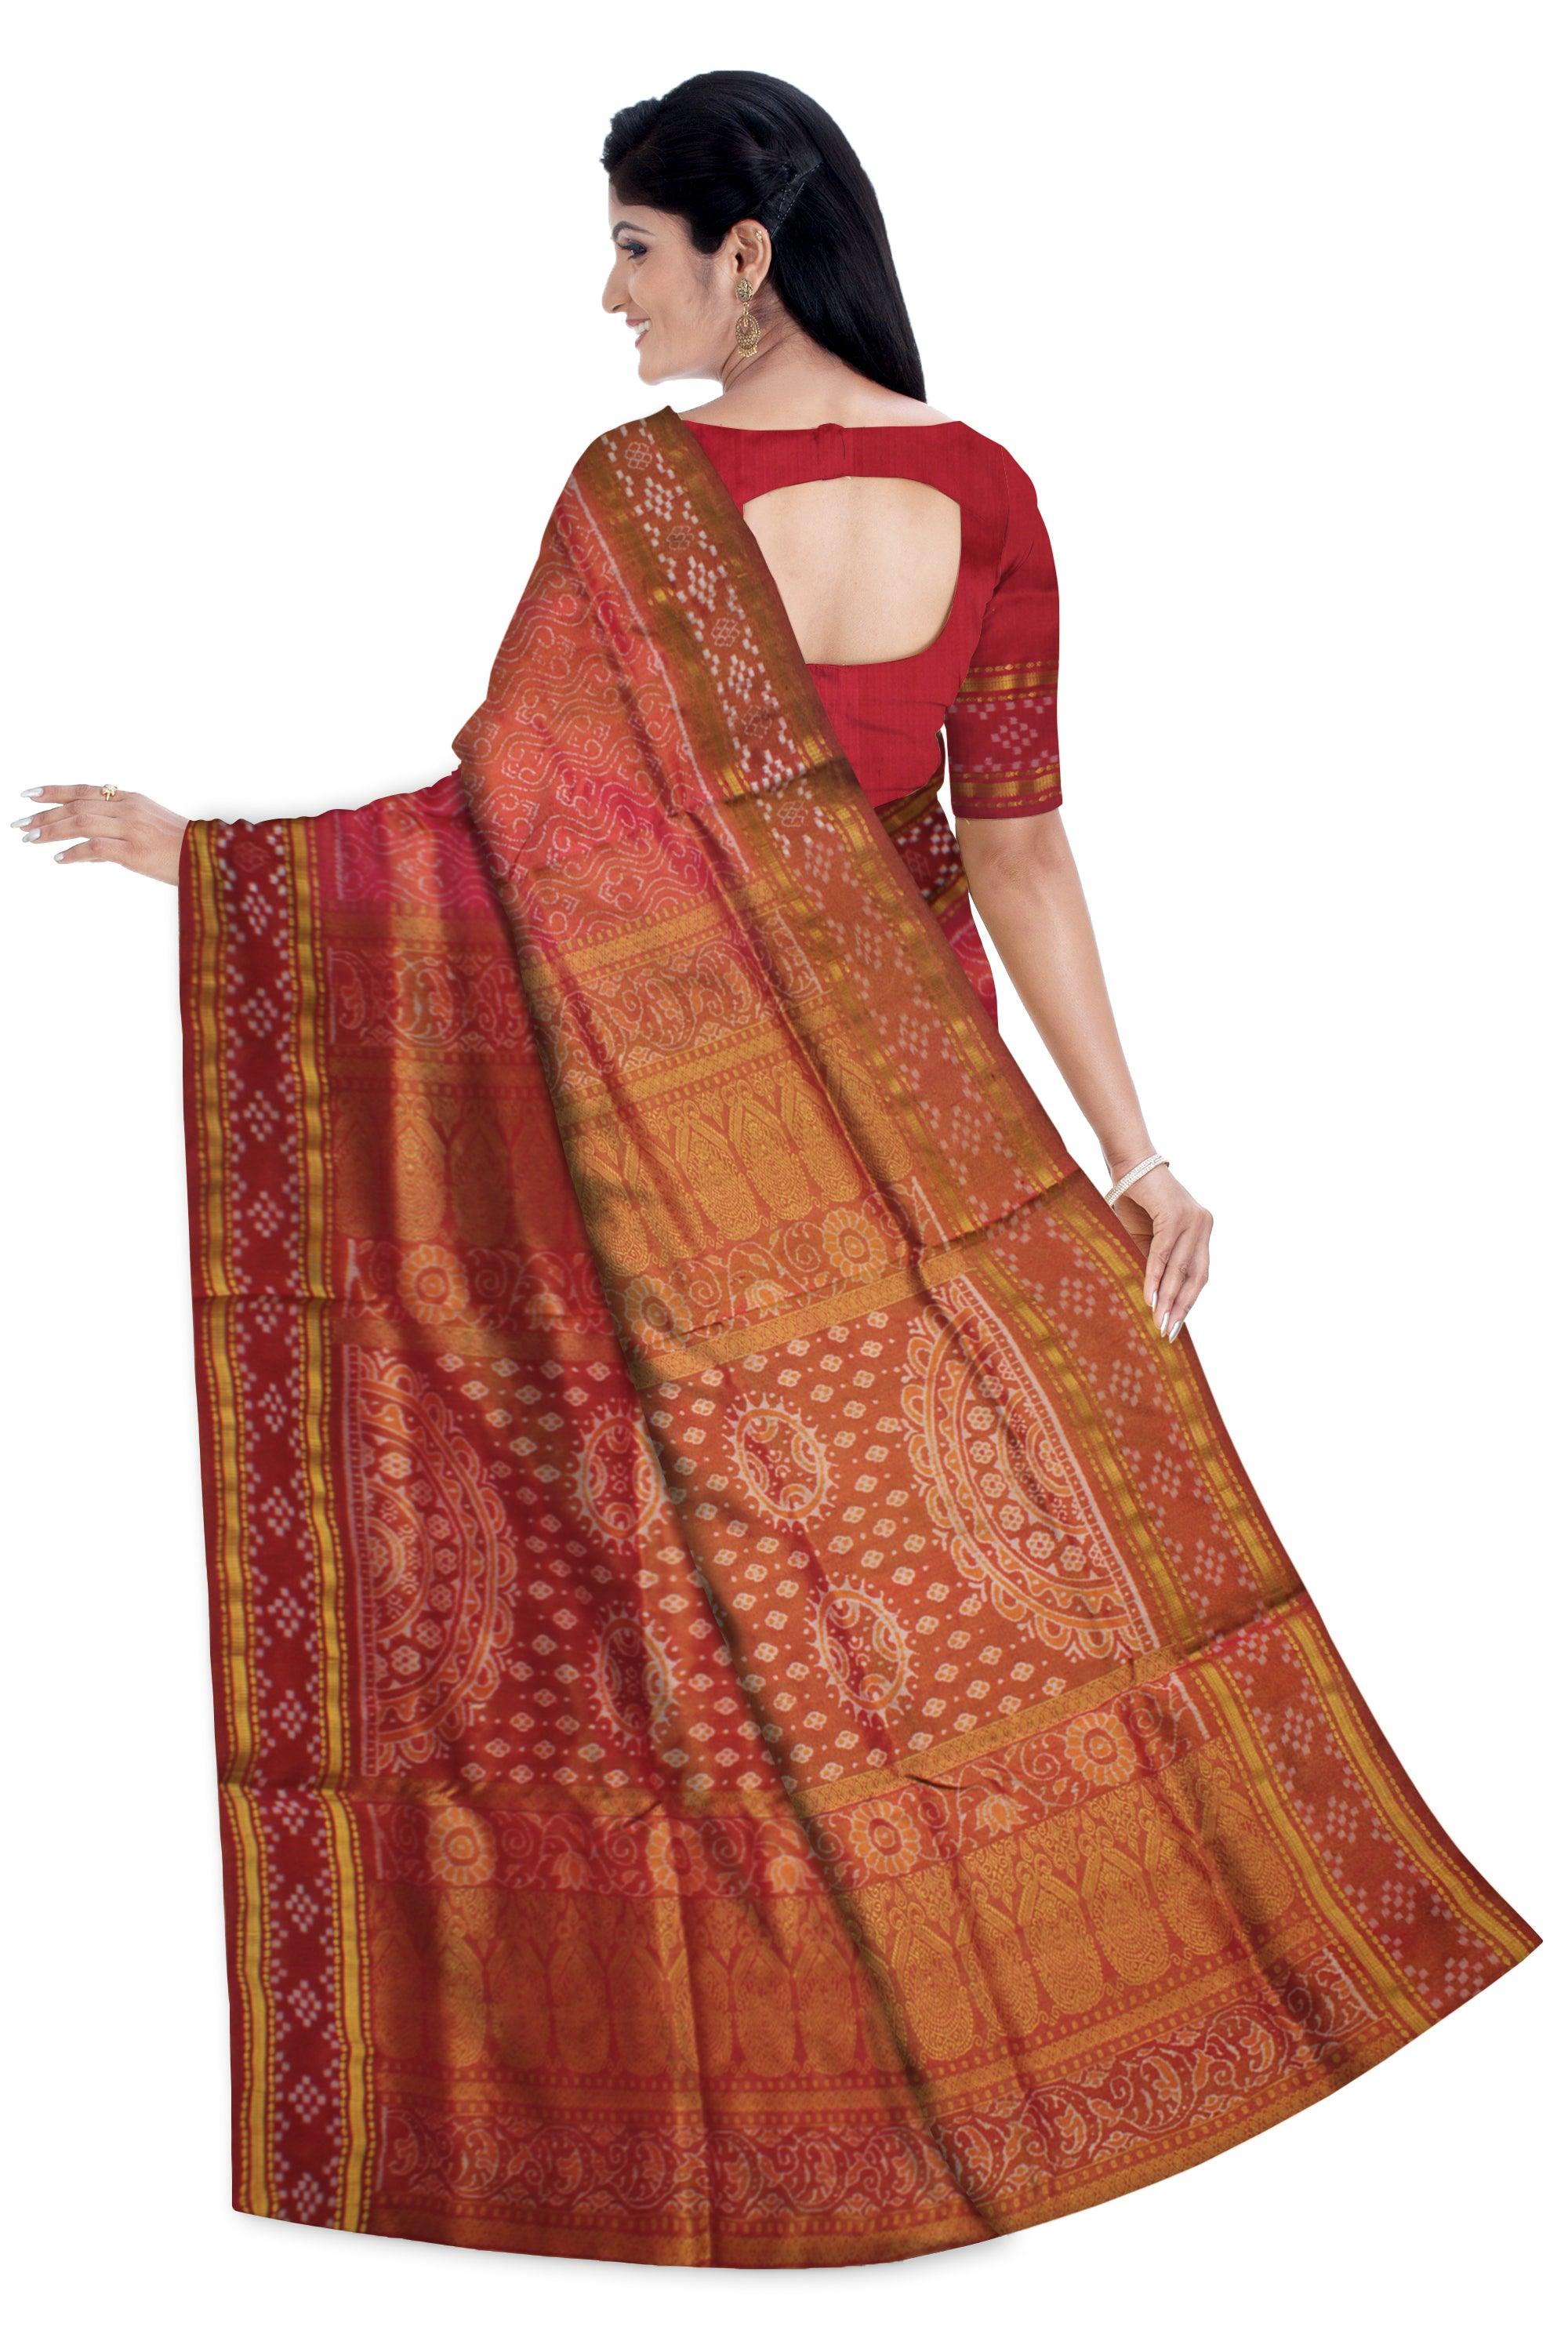 ROSY PINK AND MAROON COLOR IKAT PATTERN PURE TISSUE SILK SAREE, WITH BLOUSE PIECE. - Koshali Arts & Crafts Enterprise